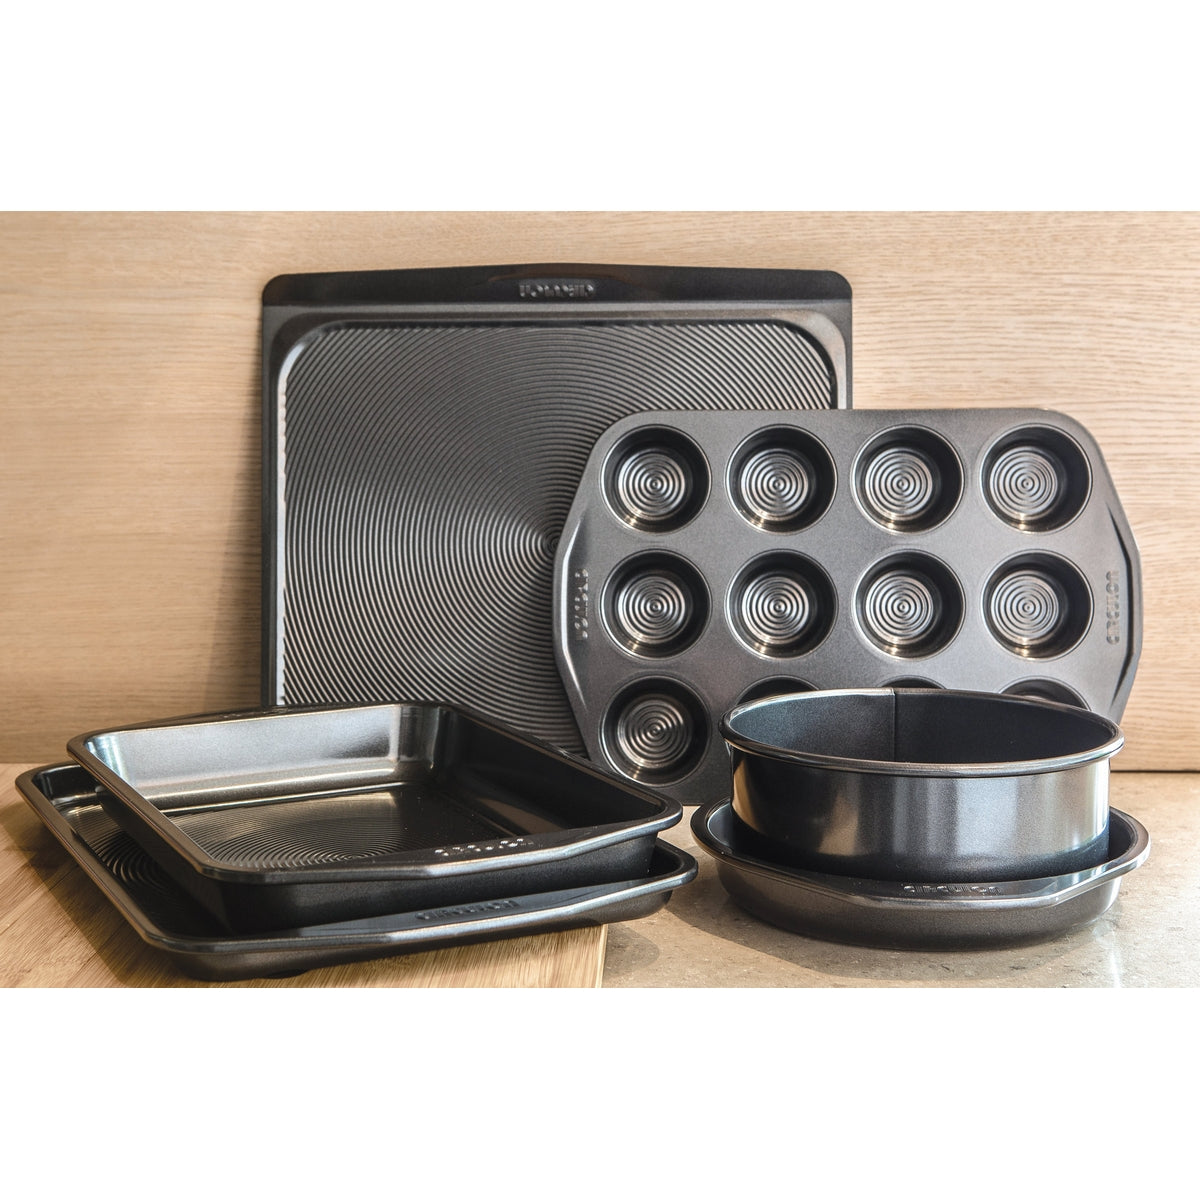 Image showing the full range of non-stick bakeware from Circulon.